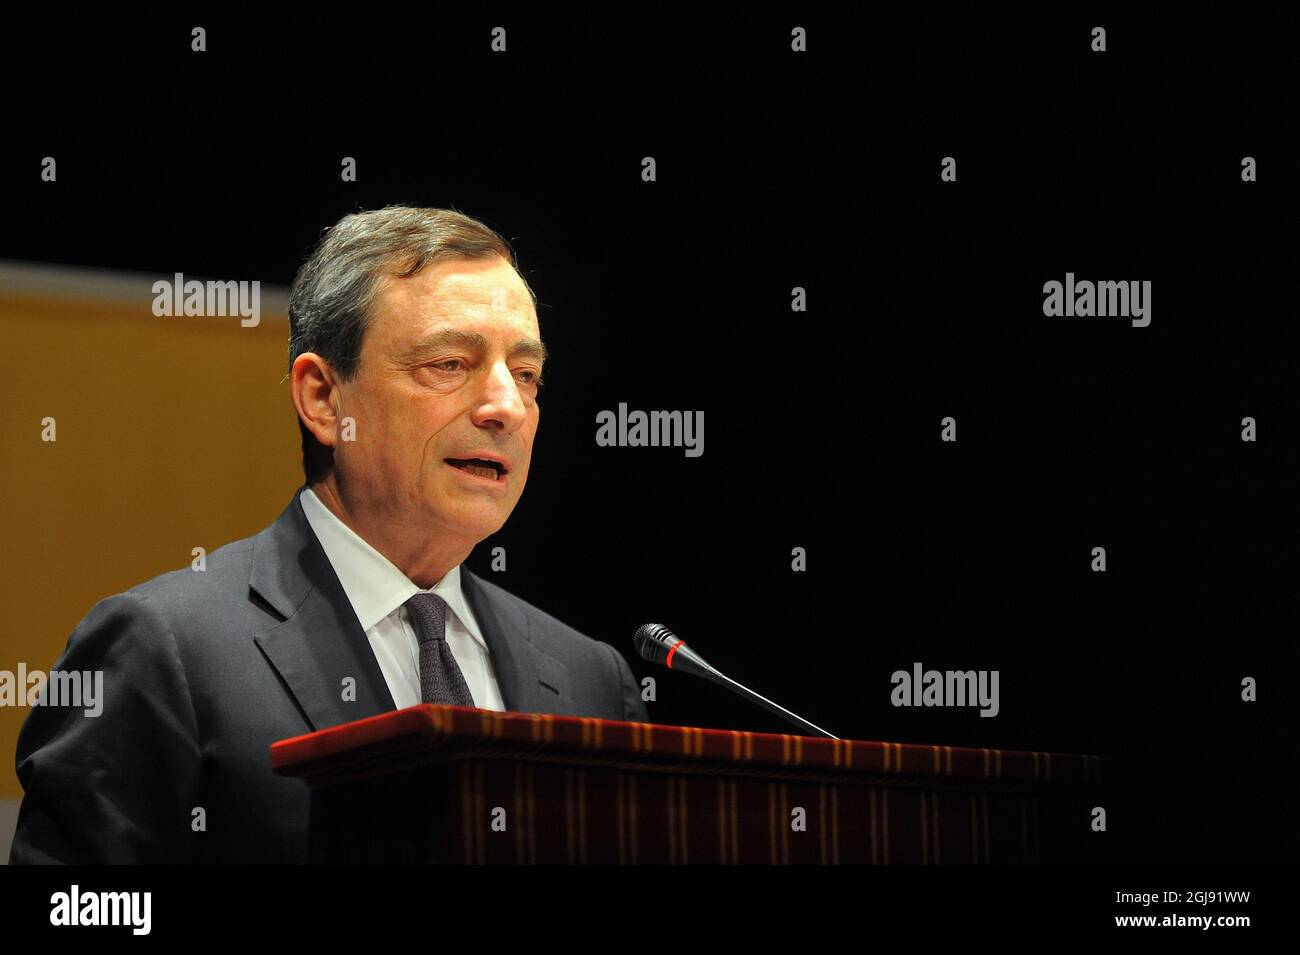 ROM, ITALY - Apr 13, 2011: The Italian Prime Minister Mario Draghi during the press conference. Rome, Italy. Stock Photo